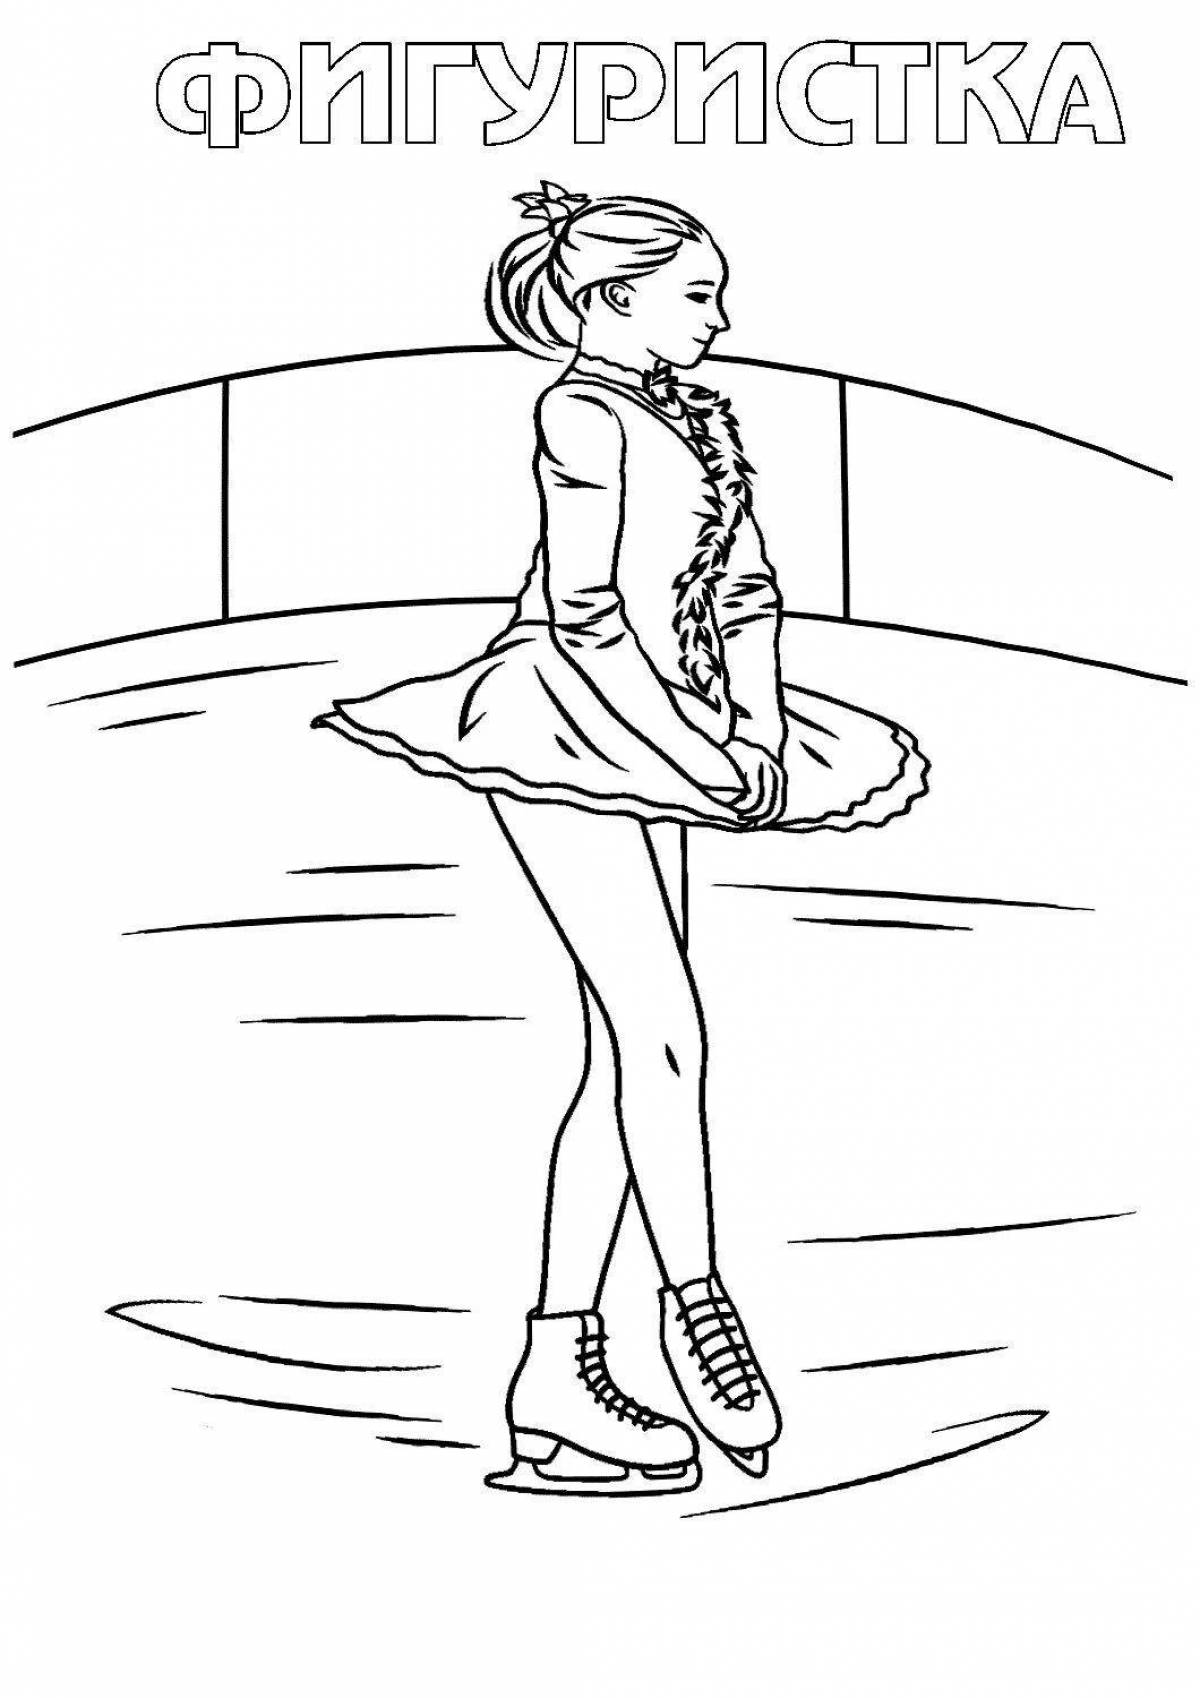 Favorite coloring page is a figure skater girl